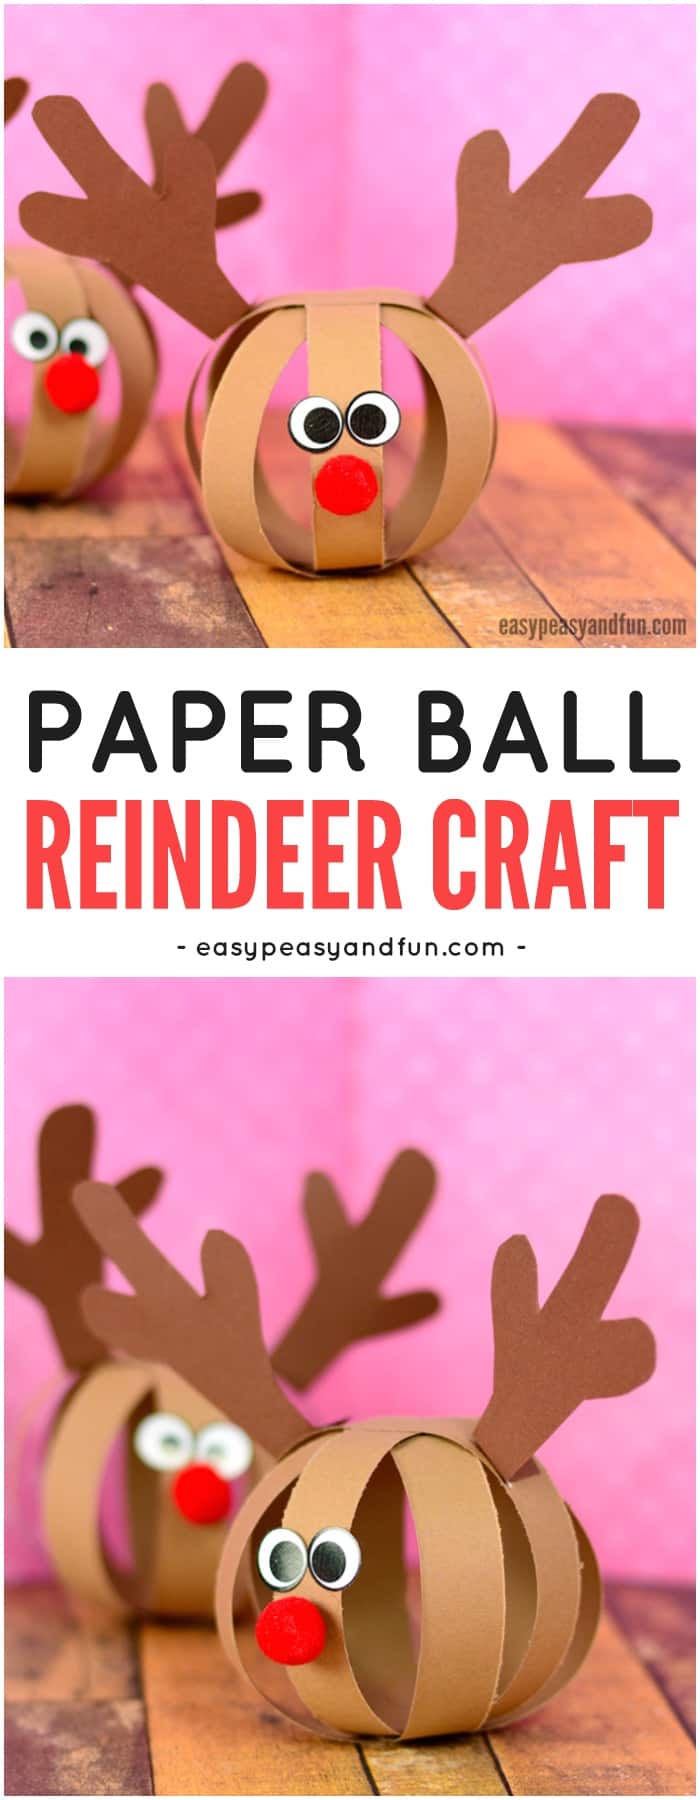 Cute paper ball reindeer crafts. The perfect Christmas crafting activity for kids.